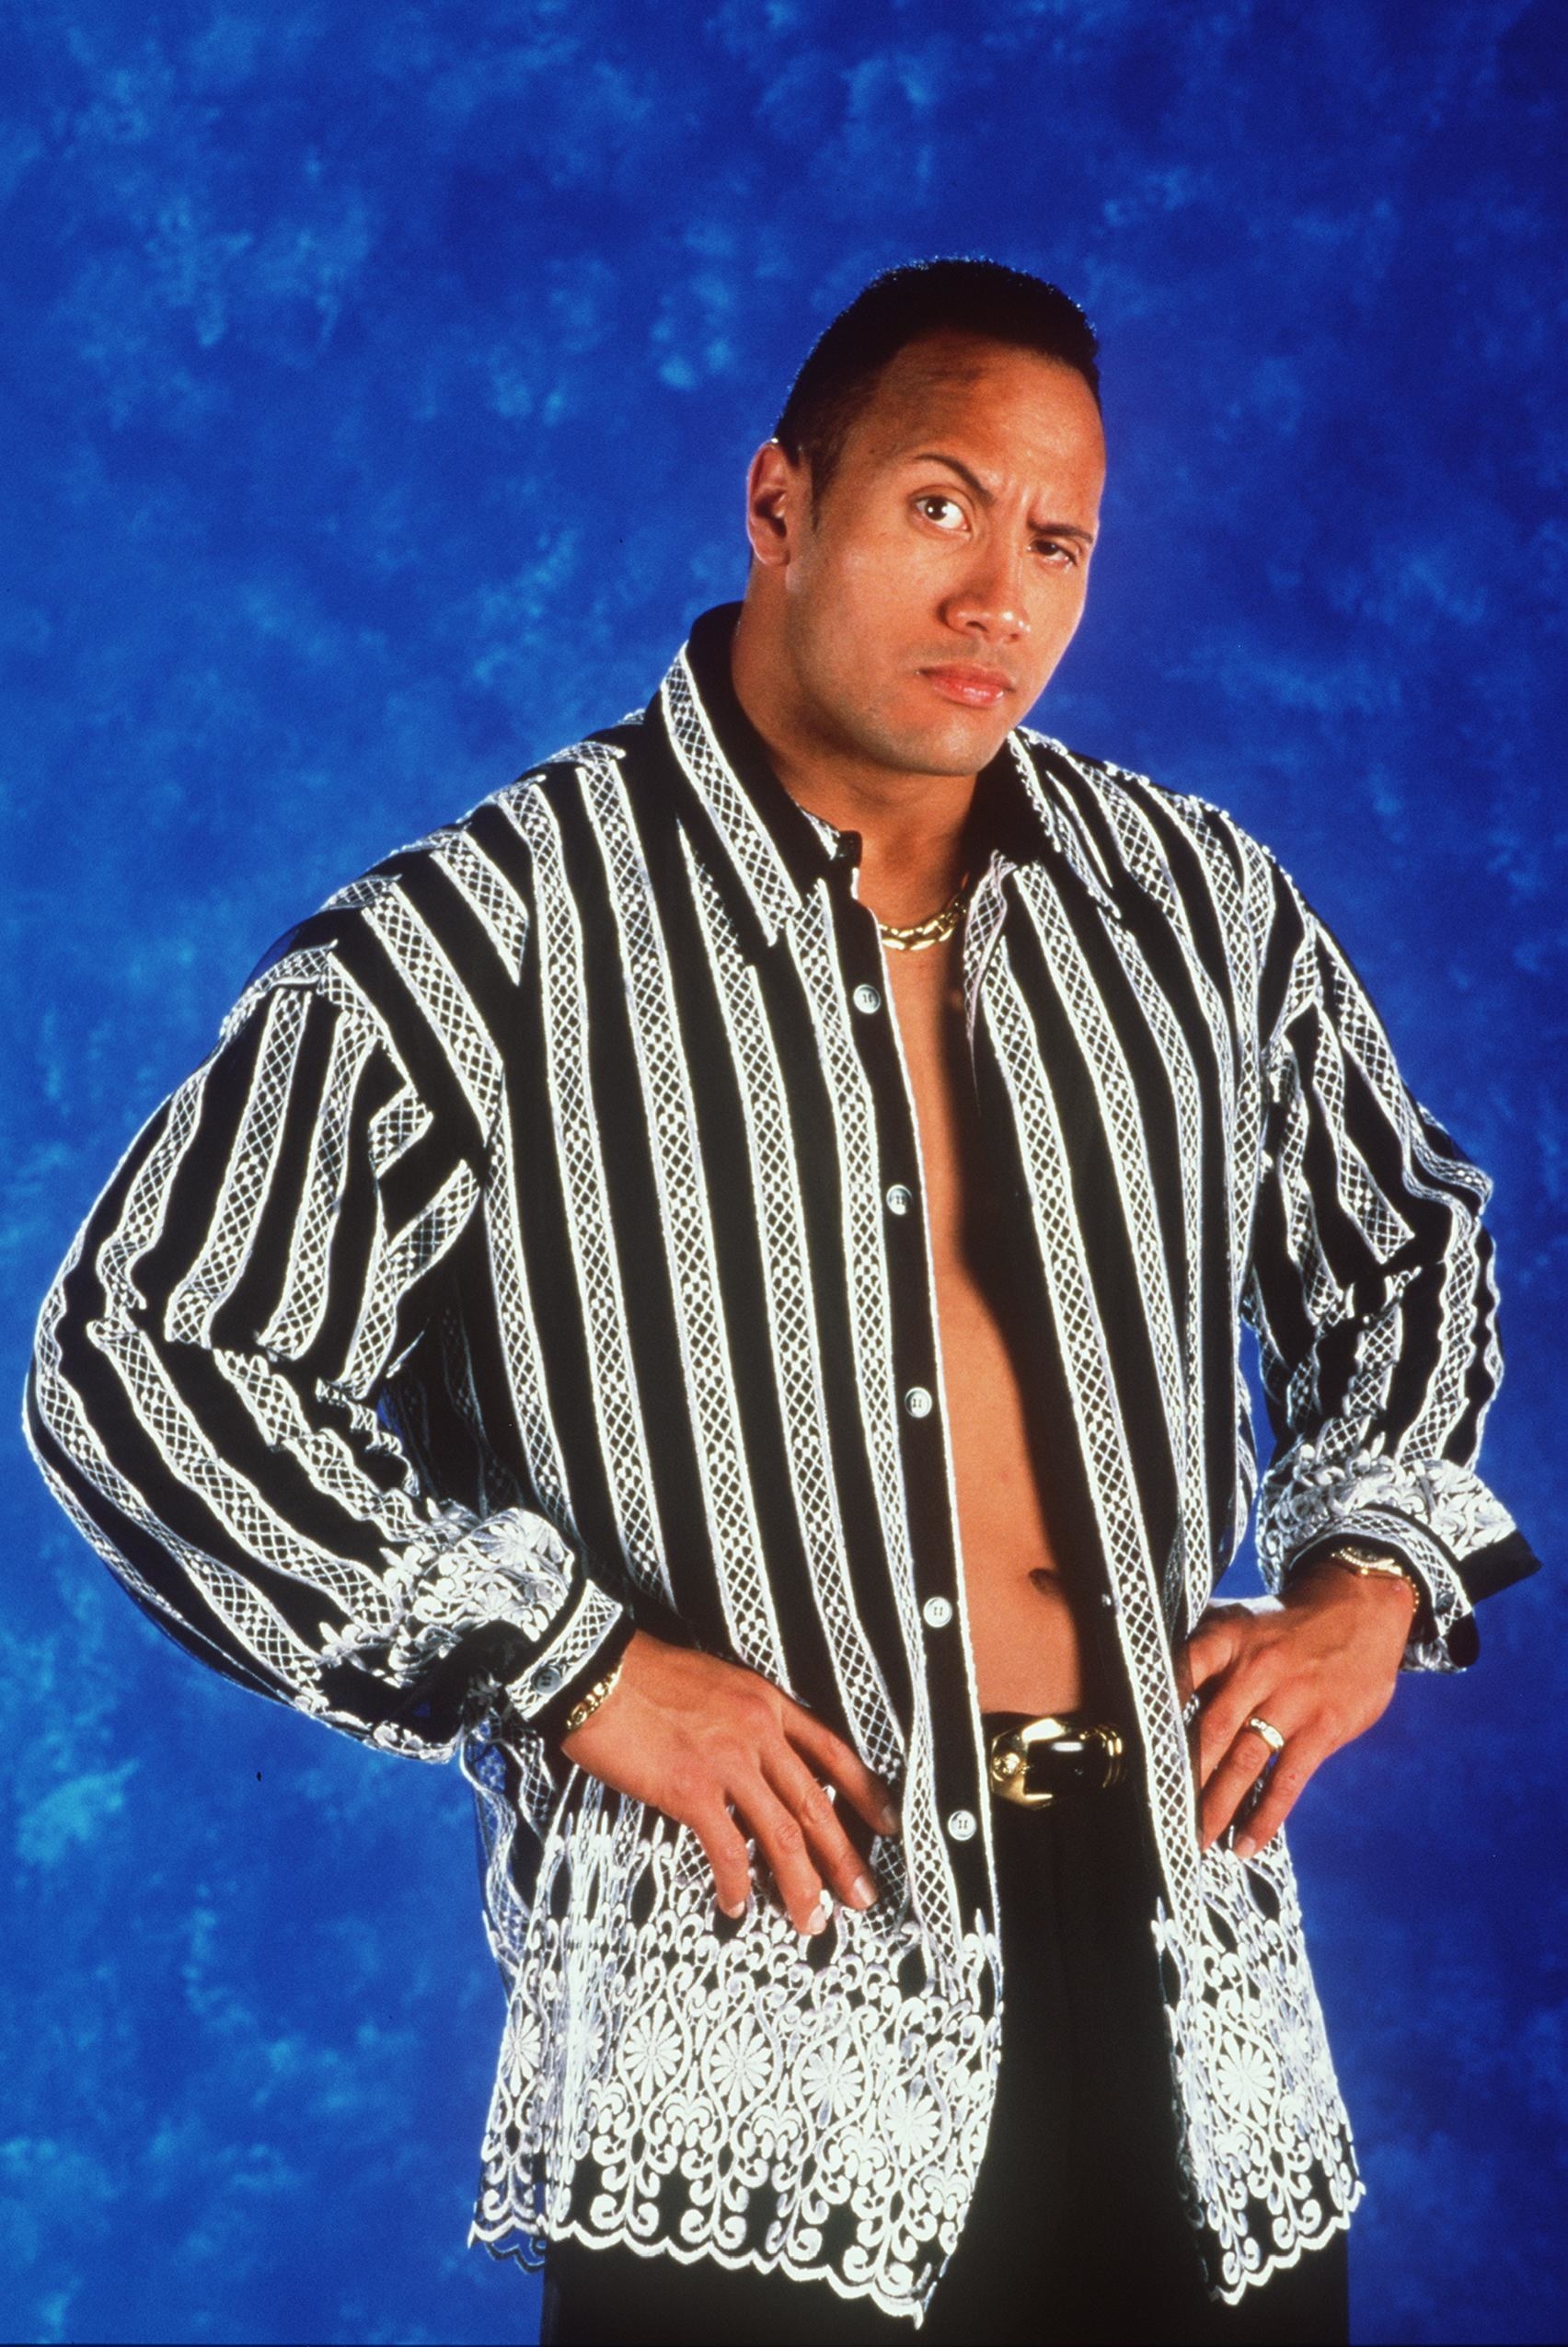 old photo of The Rock with his hands on his hips  wearing a colorful shirt